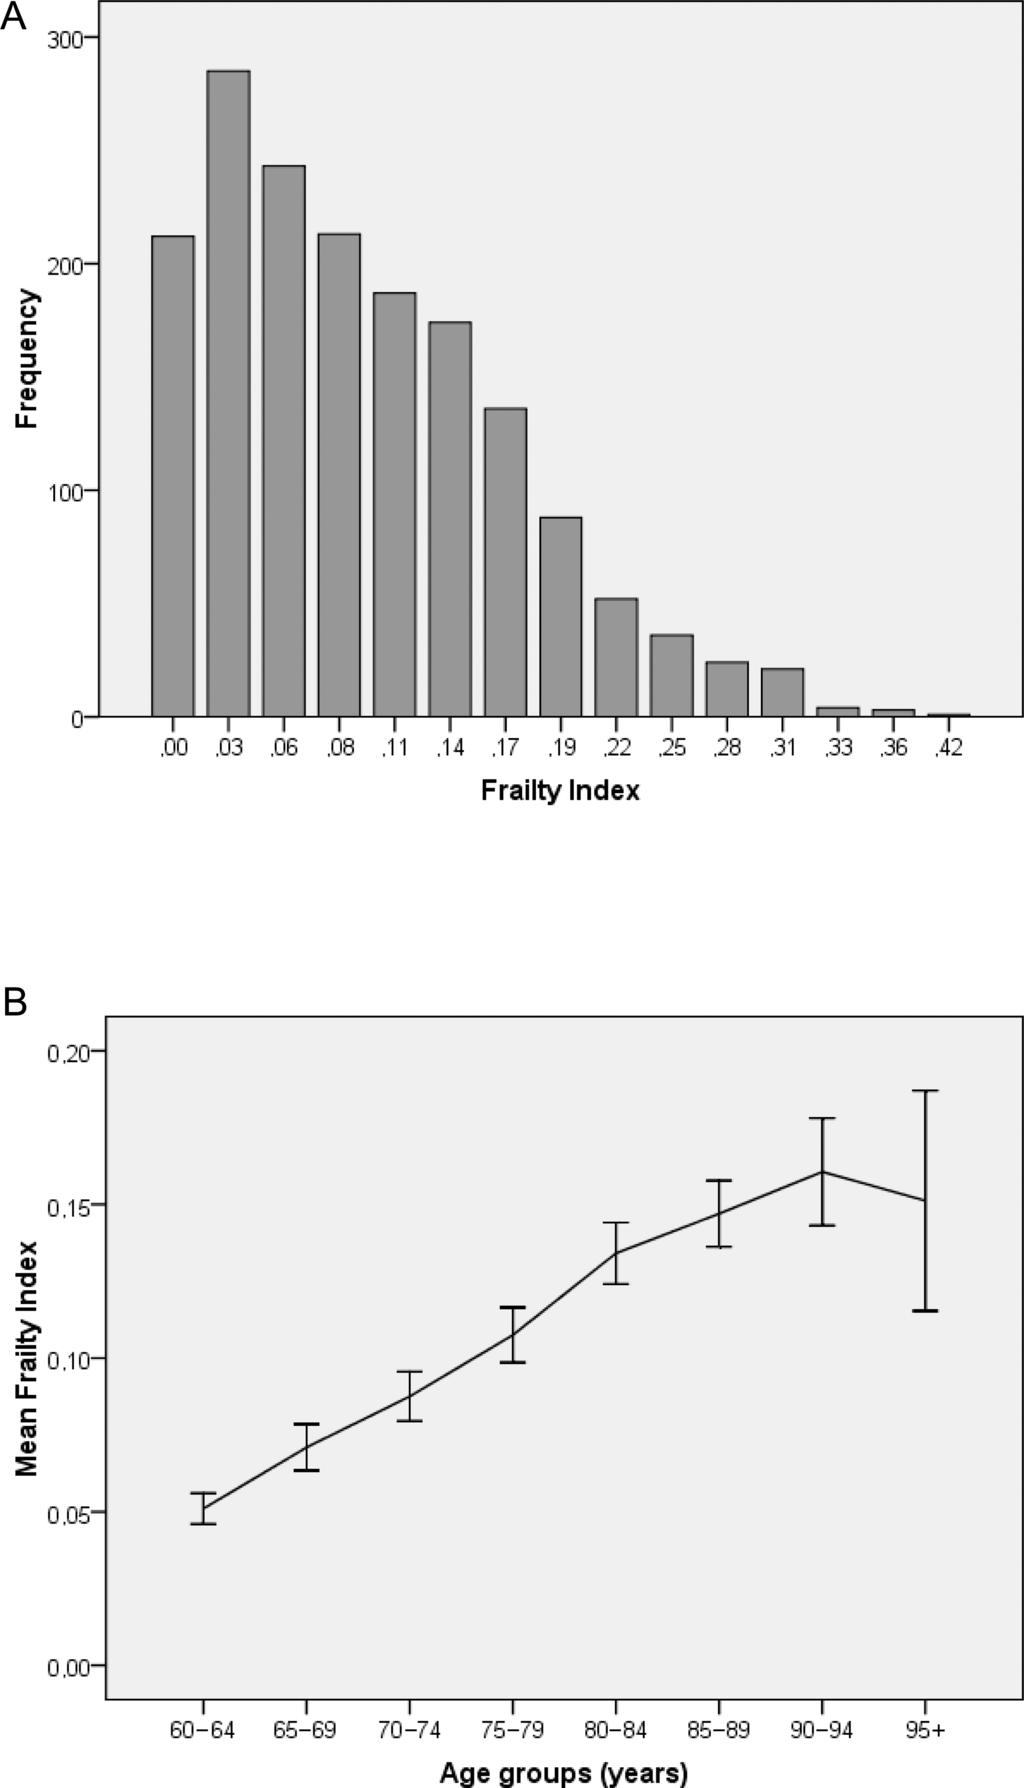 304 DRUBBEL ET AL. Figure 1. Frailty Index (FI) score distribution and mean FI score per age group. (A) Distribution of the FI. (B) Mean FI according to 5-year age group.